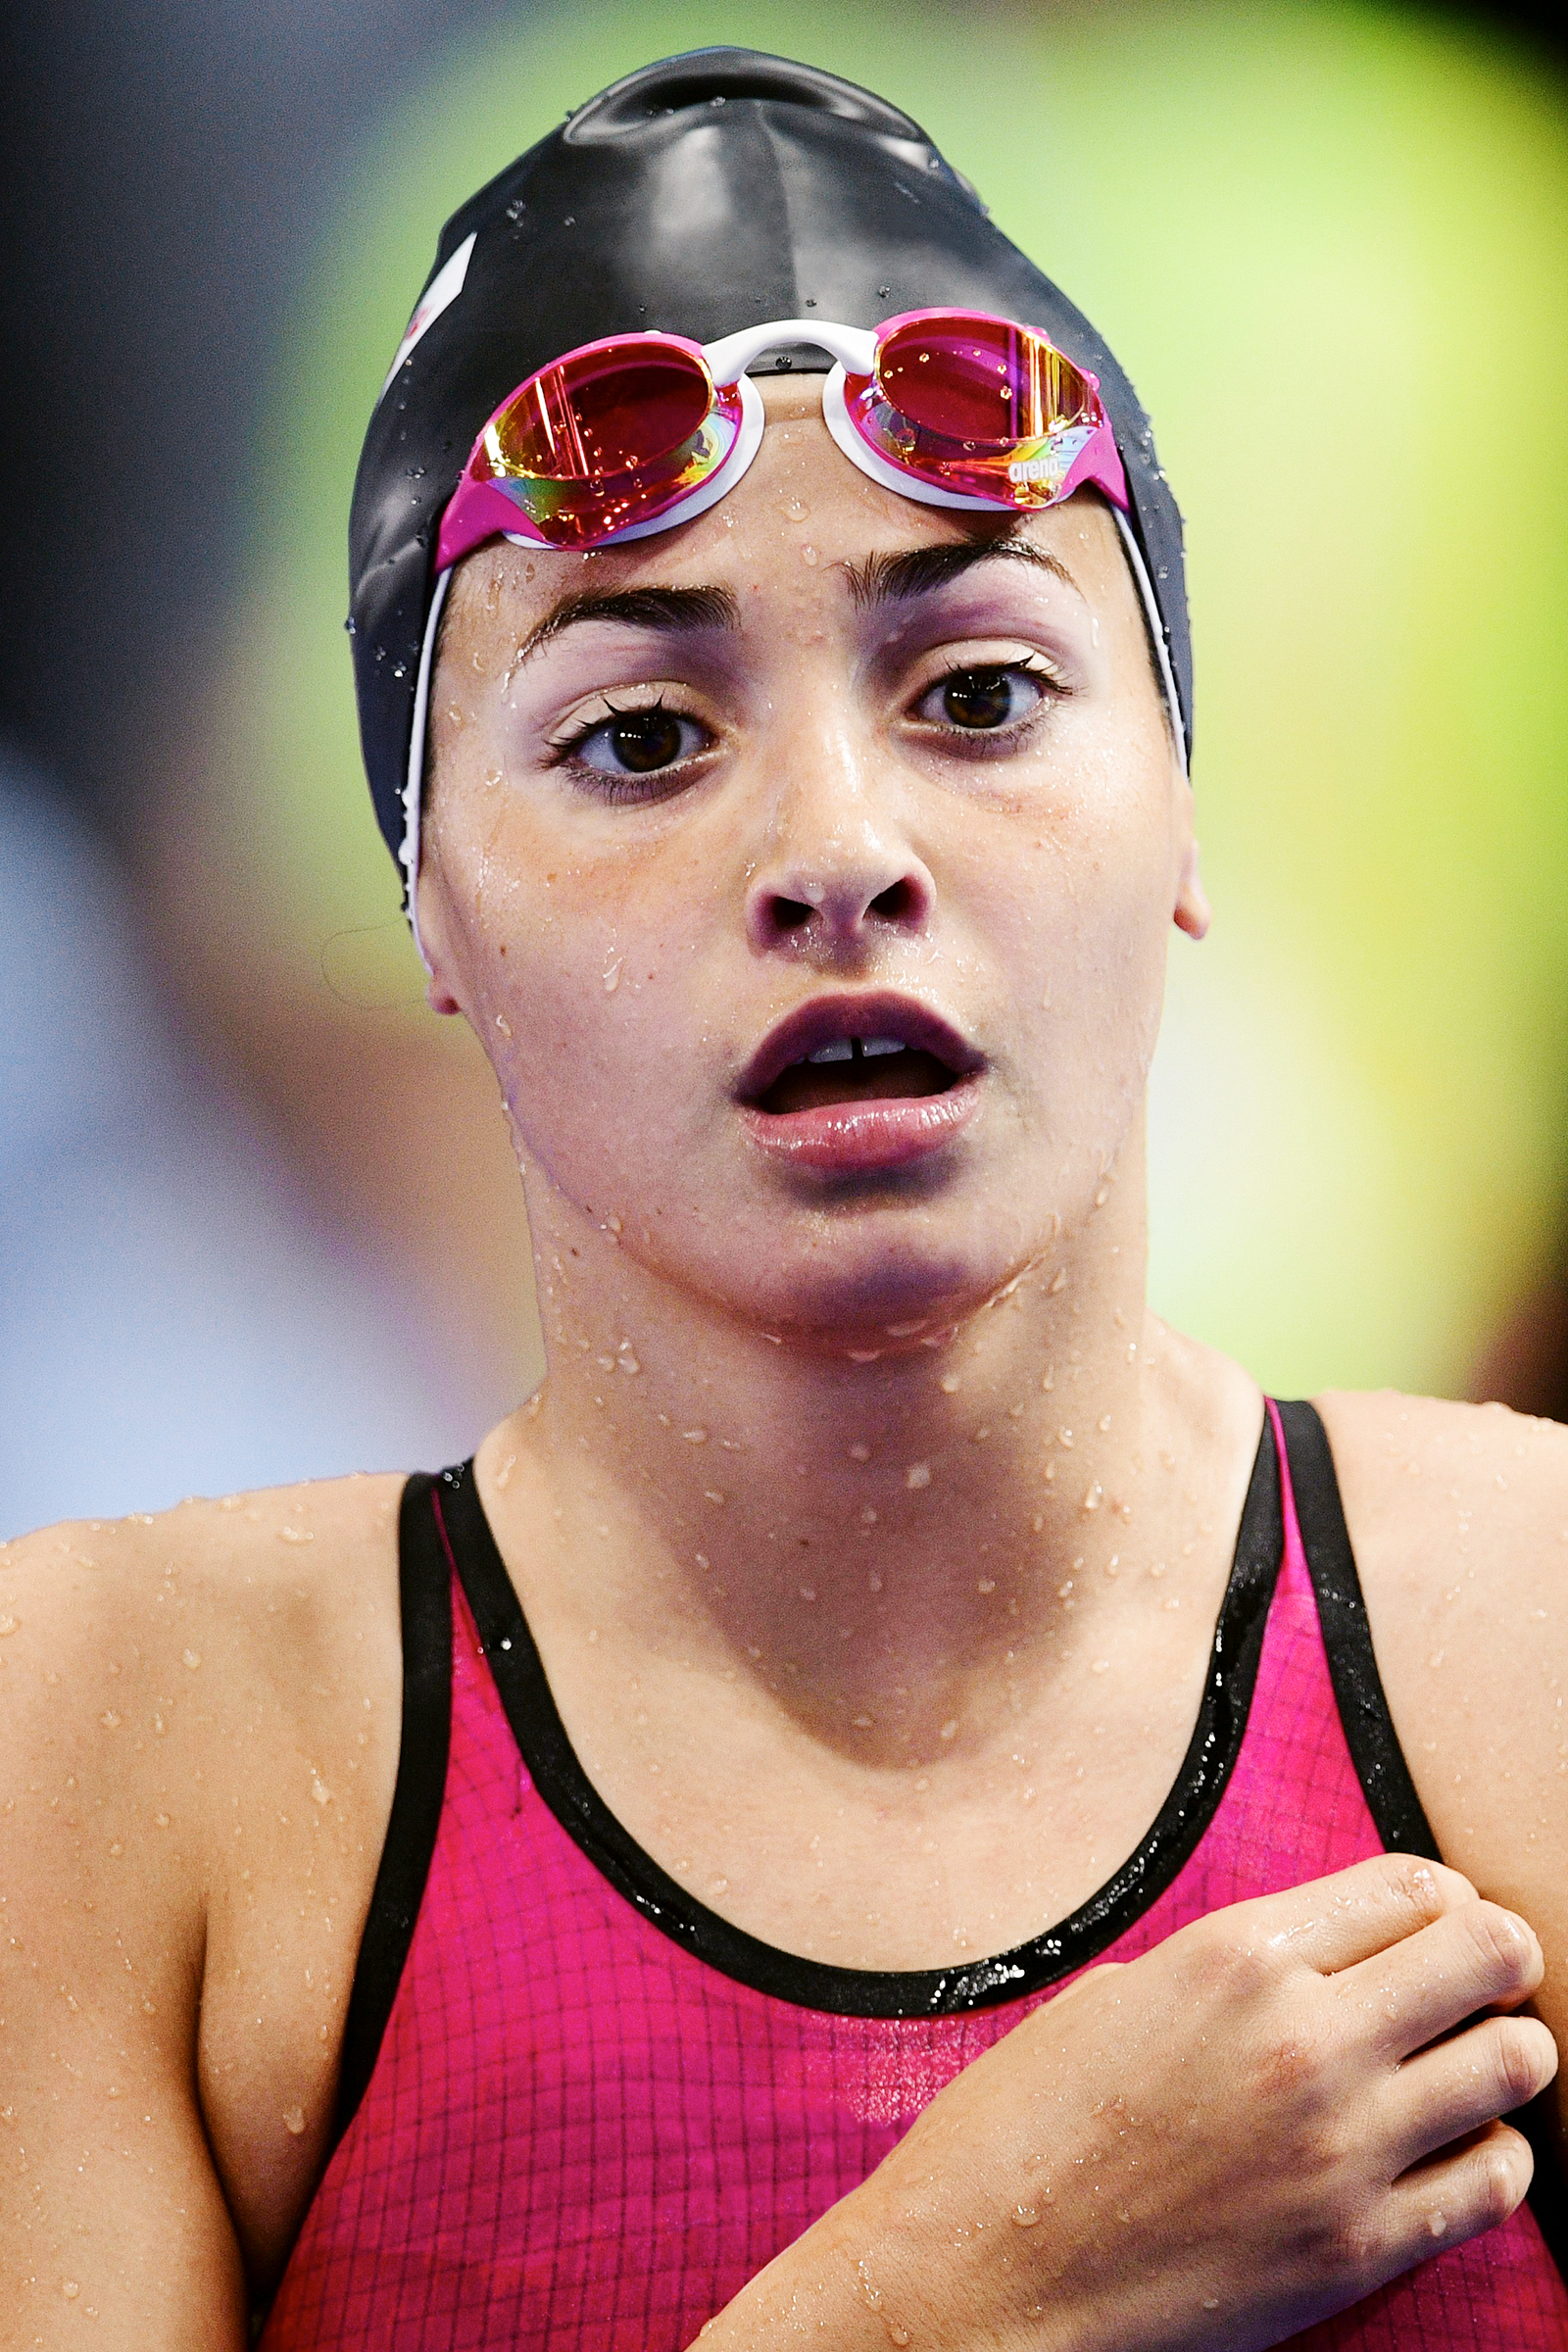 Syrian refugee Yusra Mardini reacts before competing in women's 100m butterfly heat during the swimming competition at the 2017 FINA World Championships in Budapest